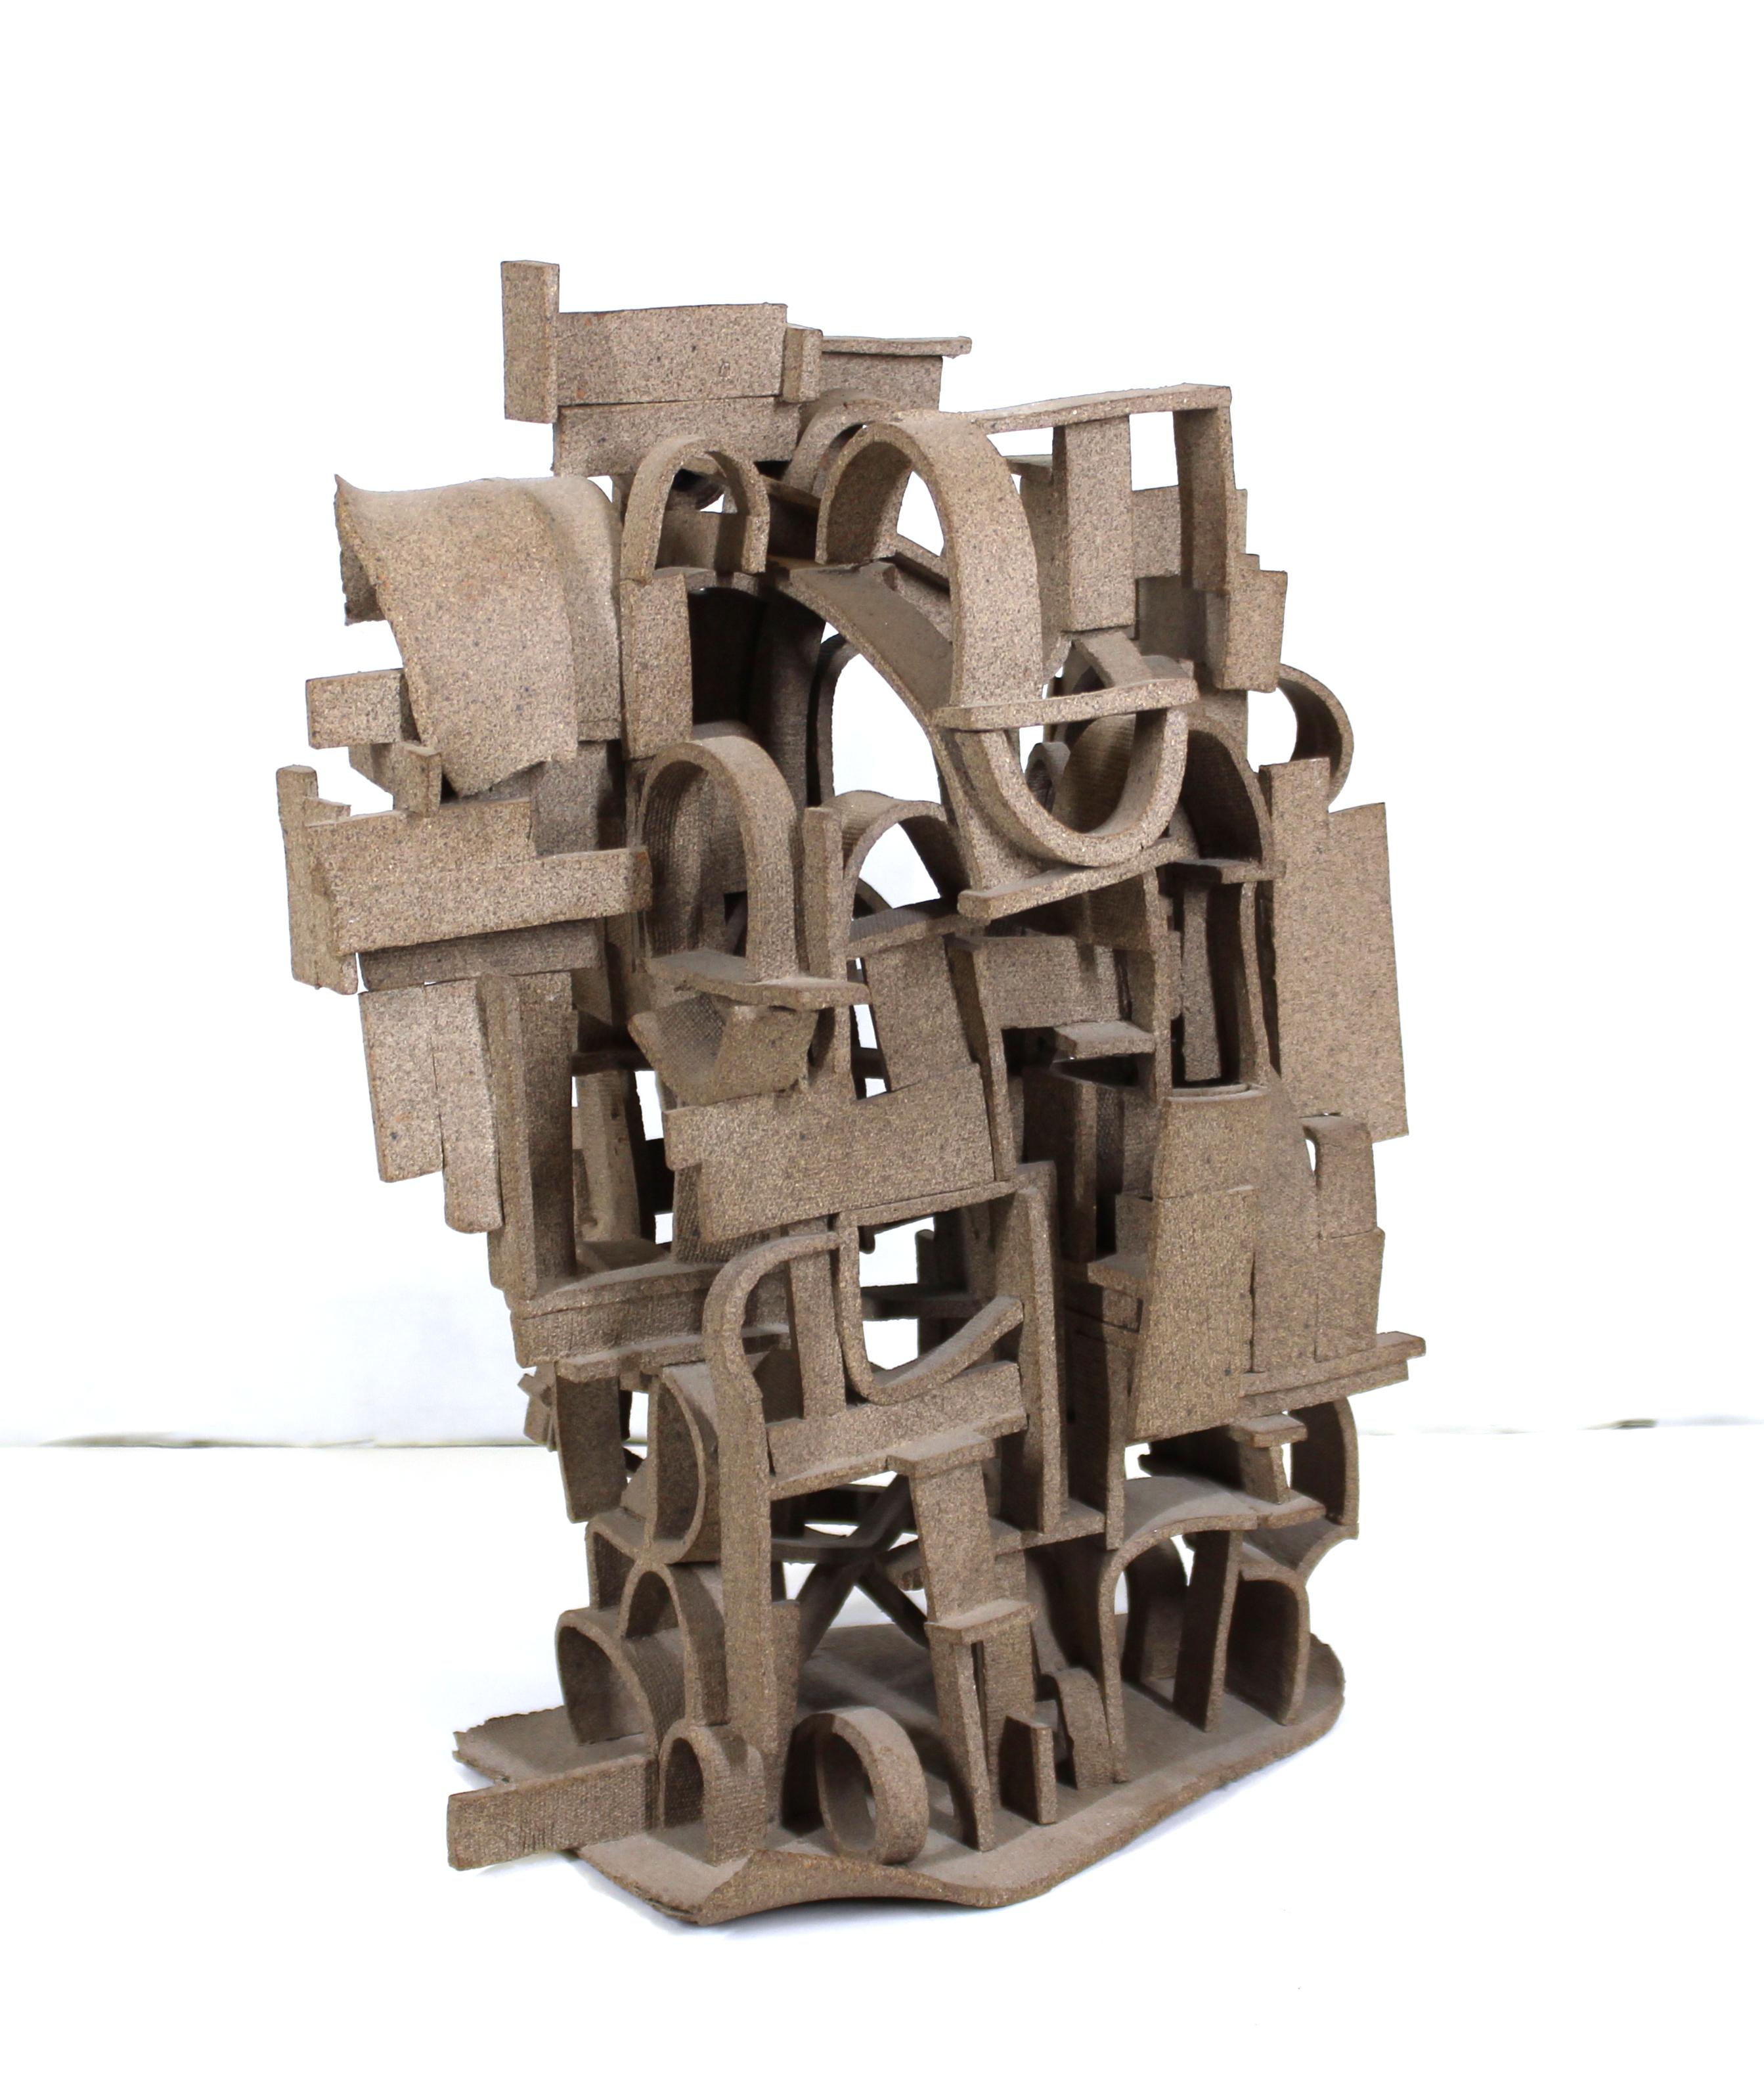 Modern Brutalist abstract tabletop sculpture made with composite material. The piece has an architectural constructed presence and no signature or mark. In great vintage condition with age-appropriate wear and use and a few minor areas where